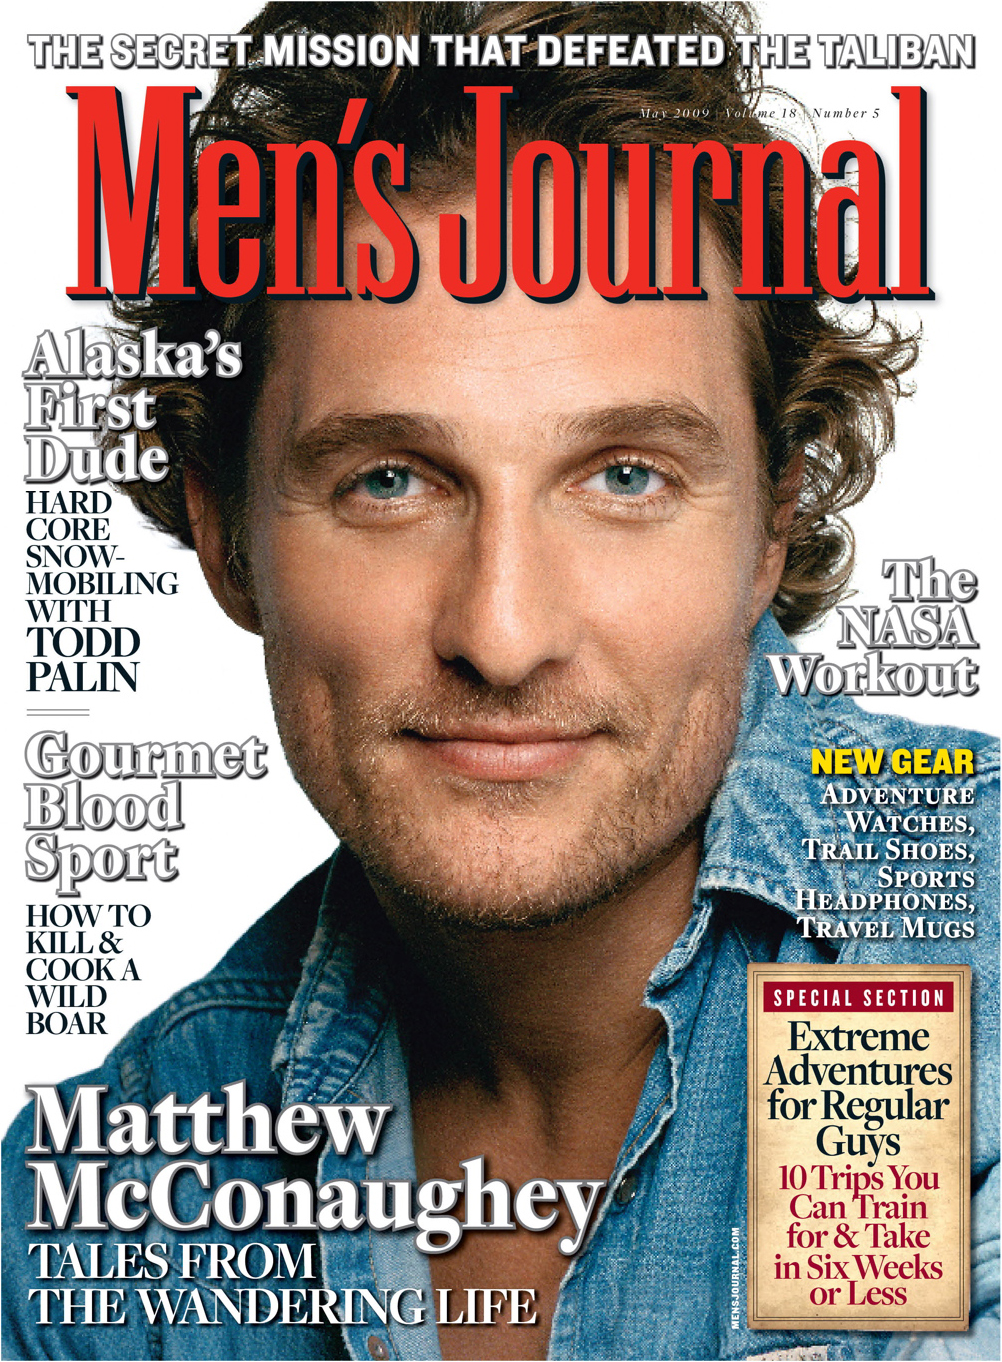 Men’s Journal Magazine Subscription just $3.99/year (Reg. $19.99) TODAY ONLY!